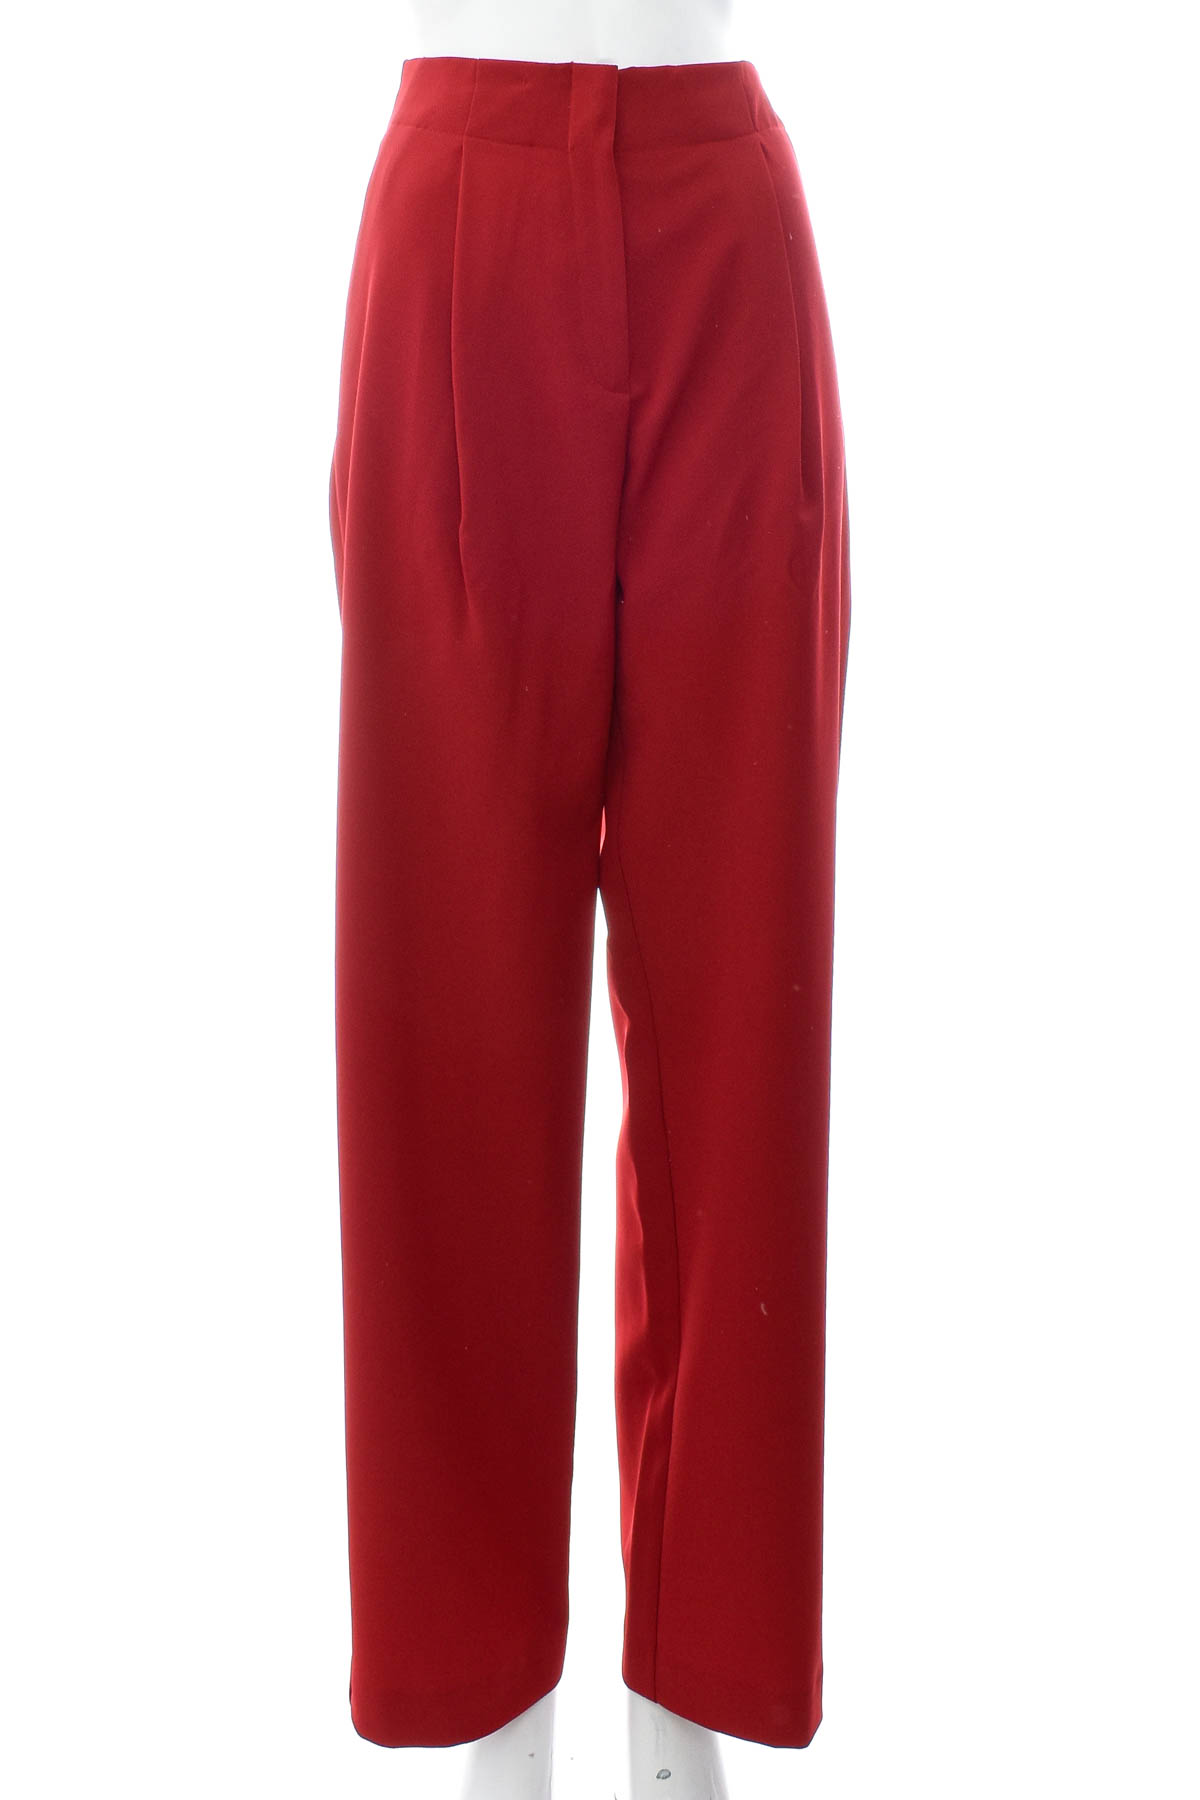 Women's trousers - MNG SUIT - 0